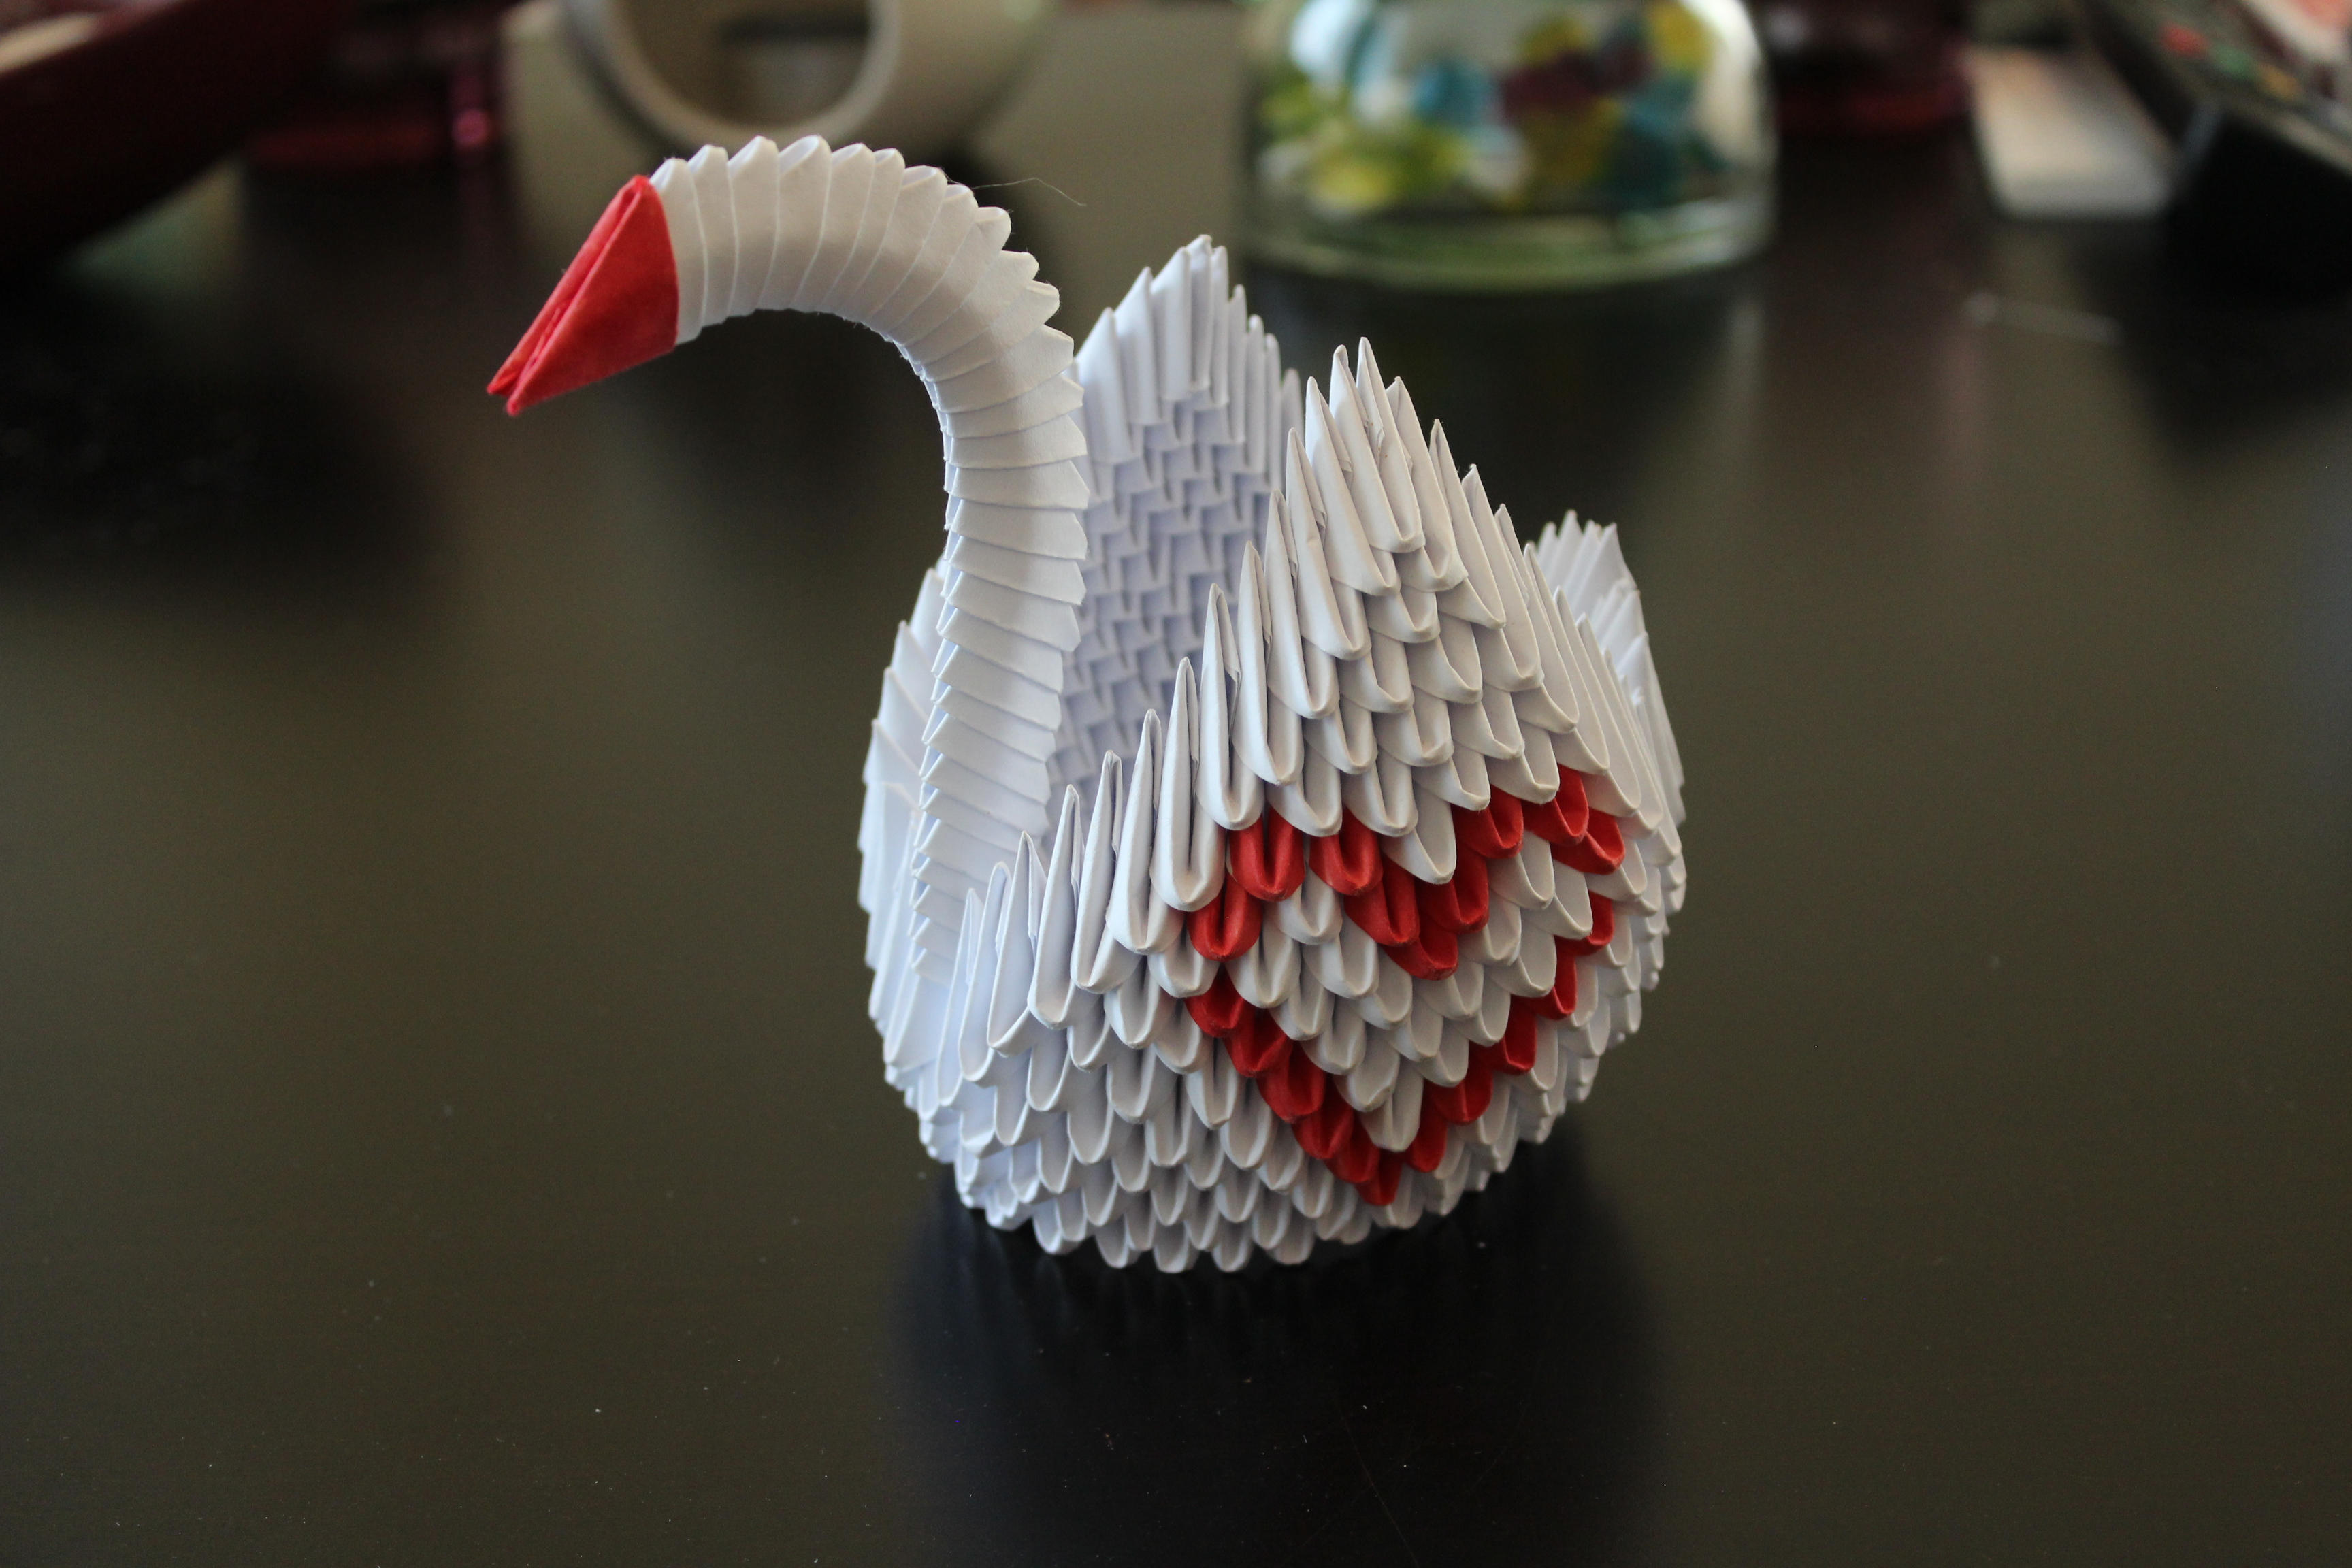 How To Make A Origami 3D Swan 3d Origami Swan Imgur